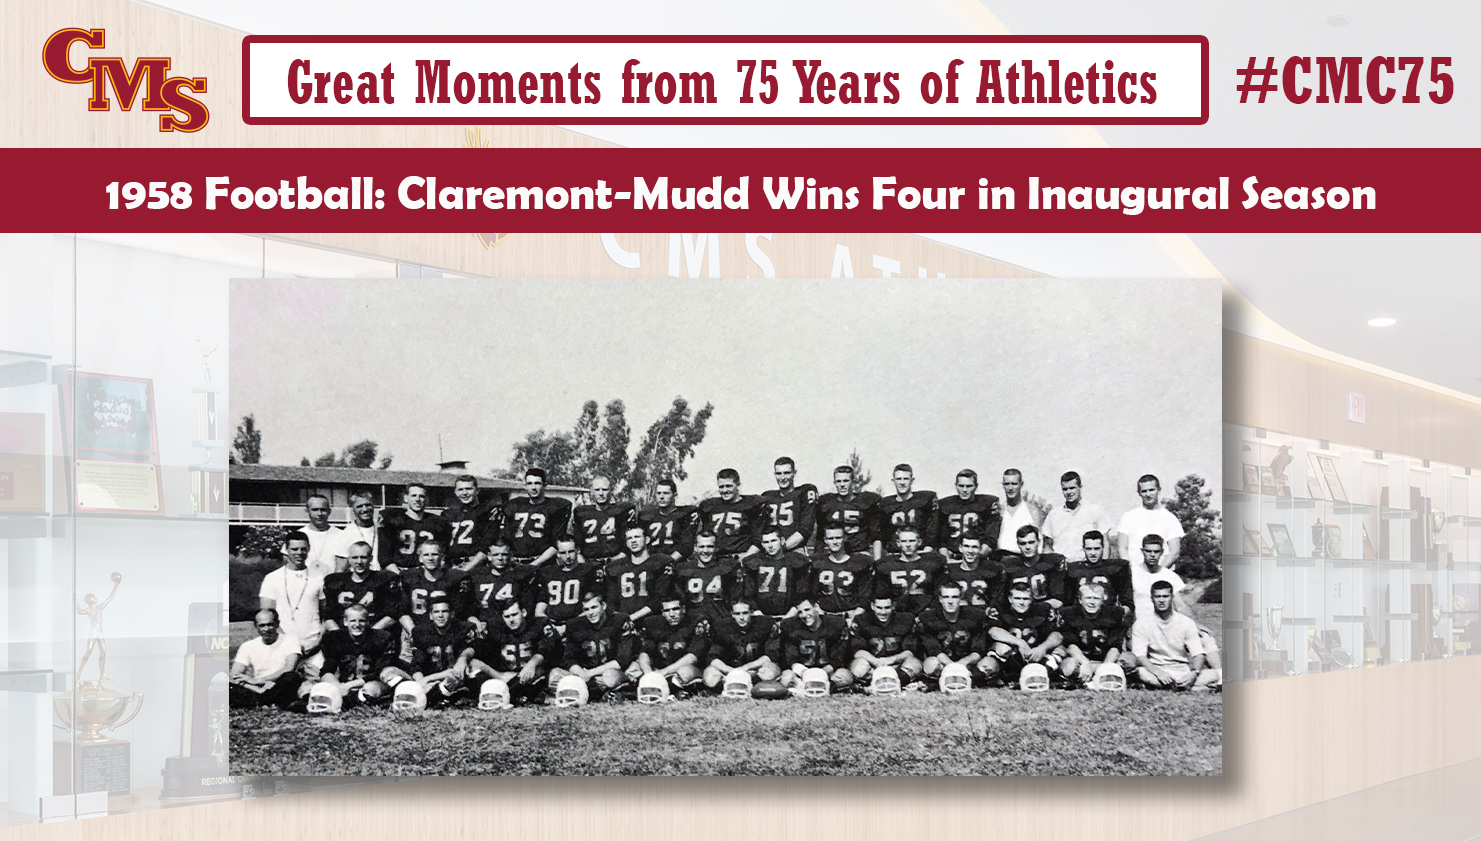 A team shot from the 1958 Claremont-Mudd Football Team. Words over the photo read: Great Moments from 75 Years of Athletics: 1958 Football: Claremont-Mudd Football Wins Four in Inaugural Season